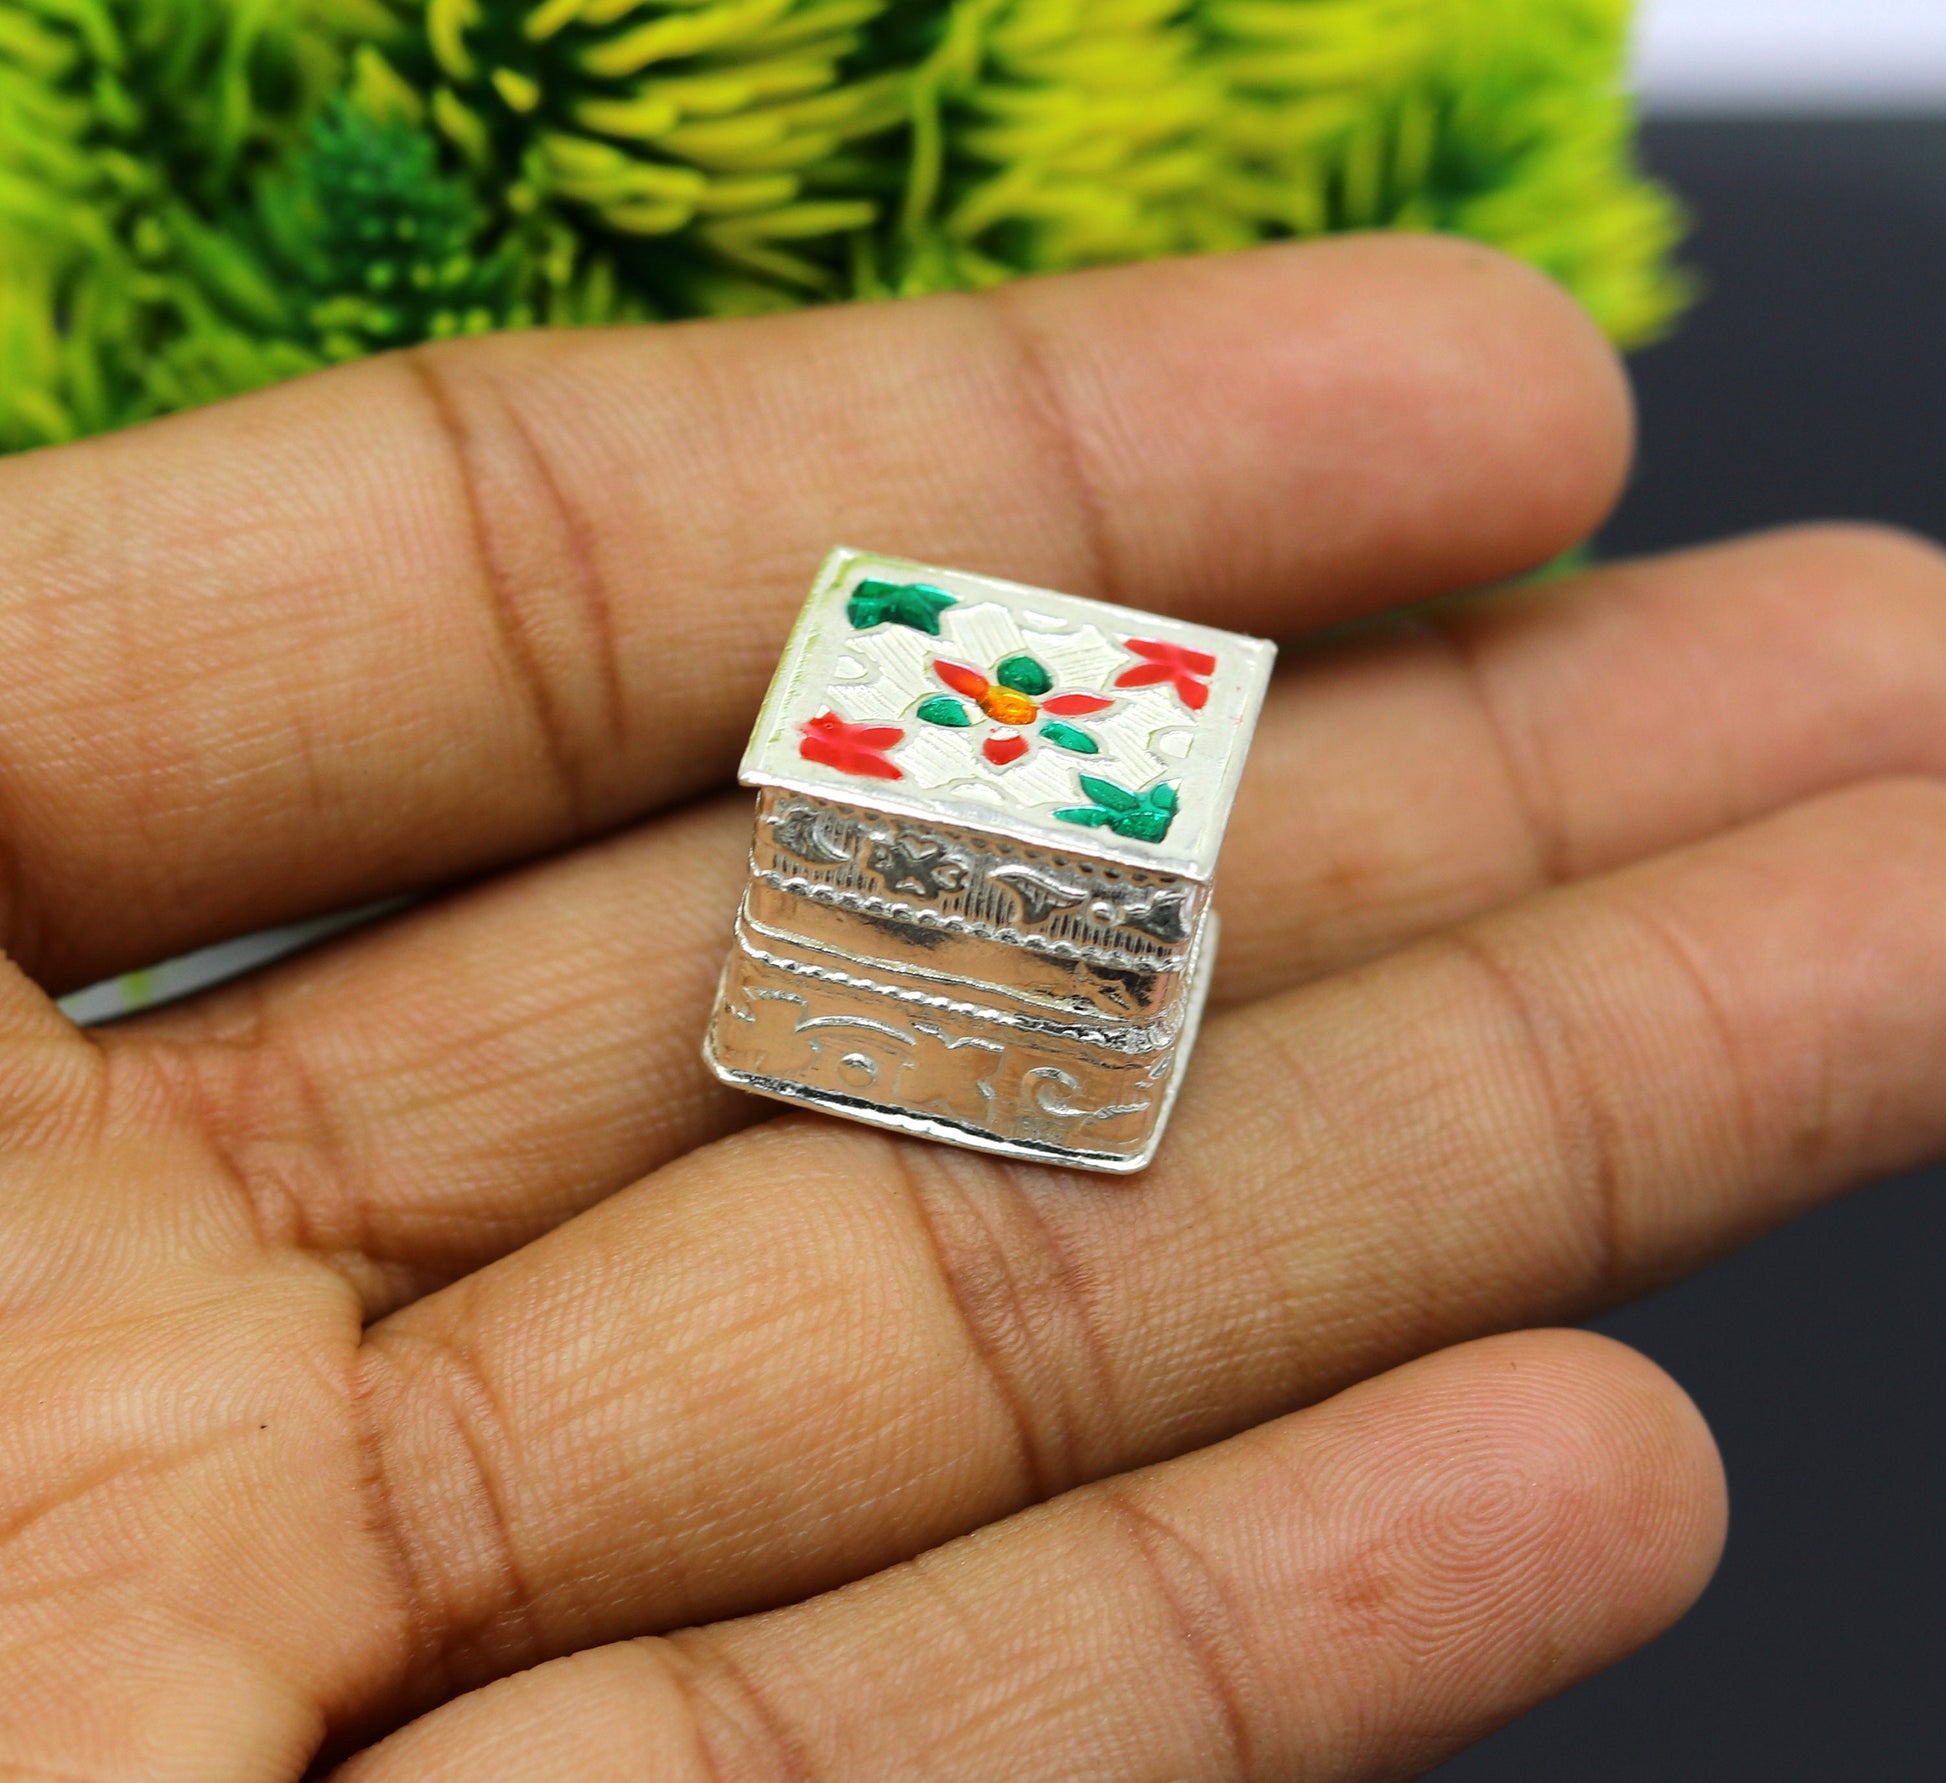 925 sterling silver handmade gorgeous small trinket box, floral enamel work casket box, mini gifting container box, silver article stb78 - TRIBAL ORNAMENTS